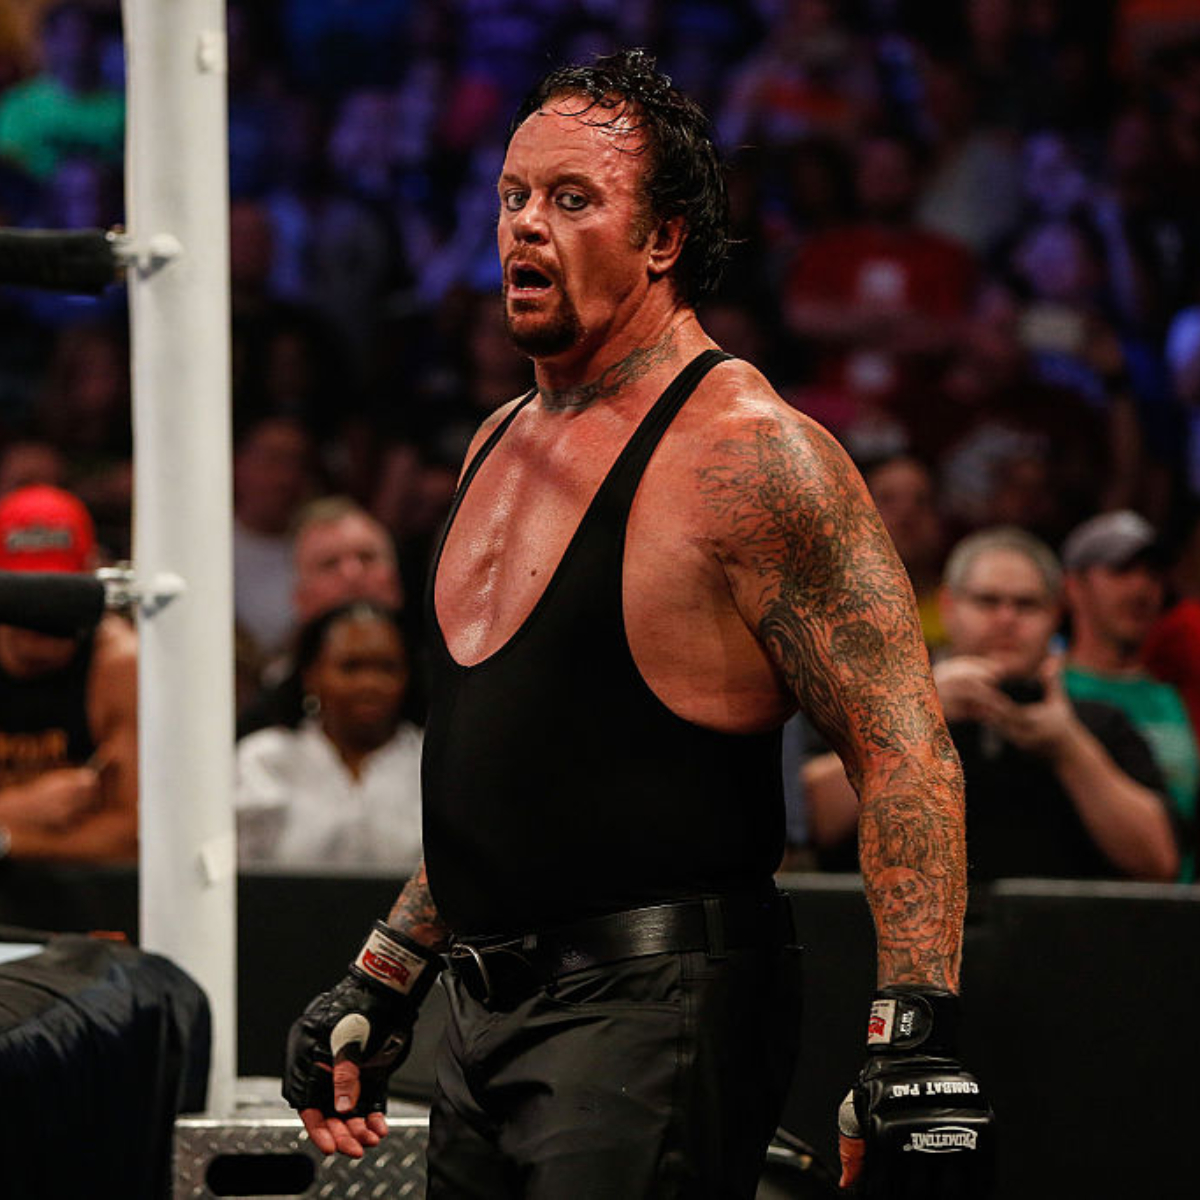 The Undertaker finds the current WWE product a little soft